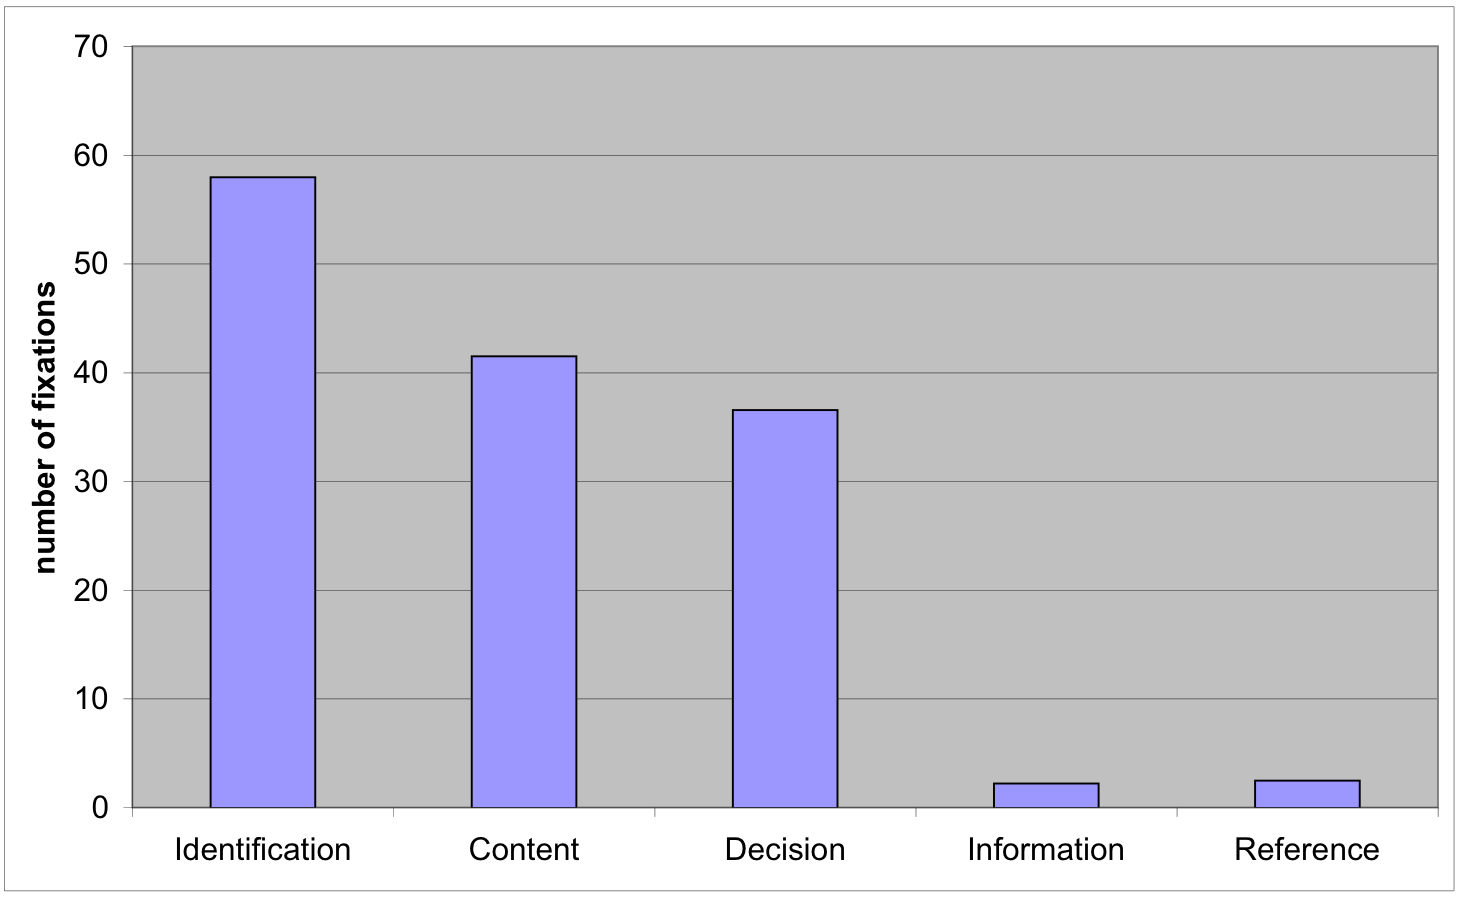 A bar chart that shows the mean number of fixations for each type of object